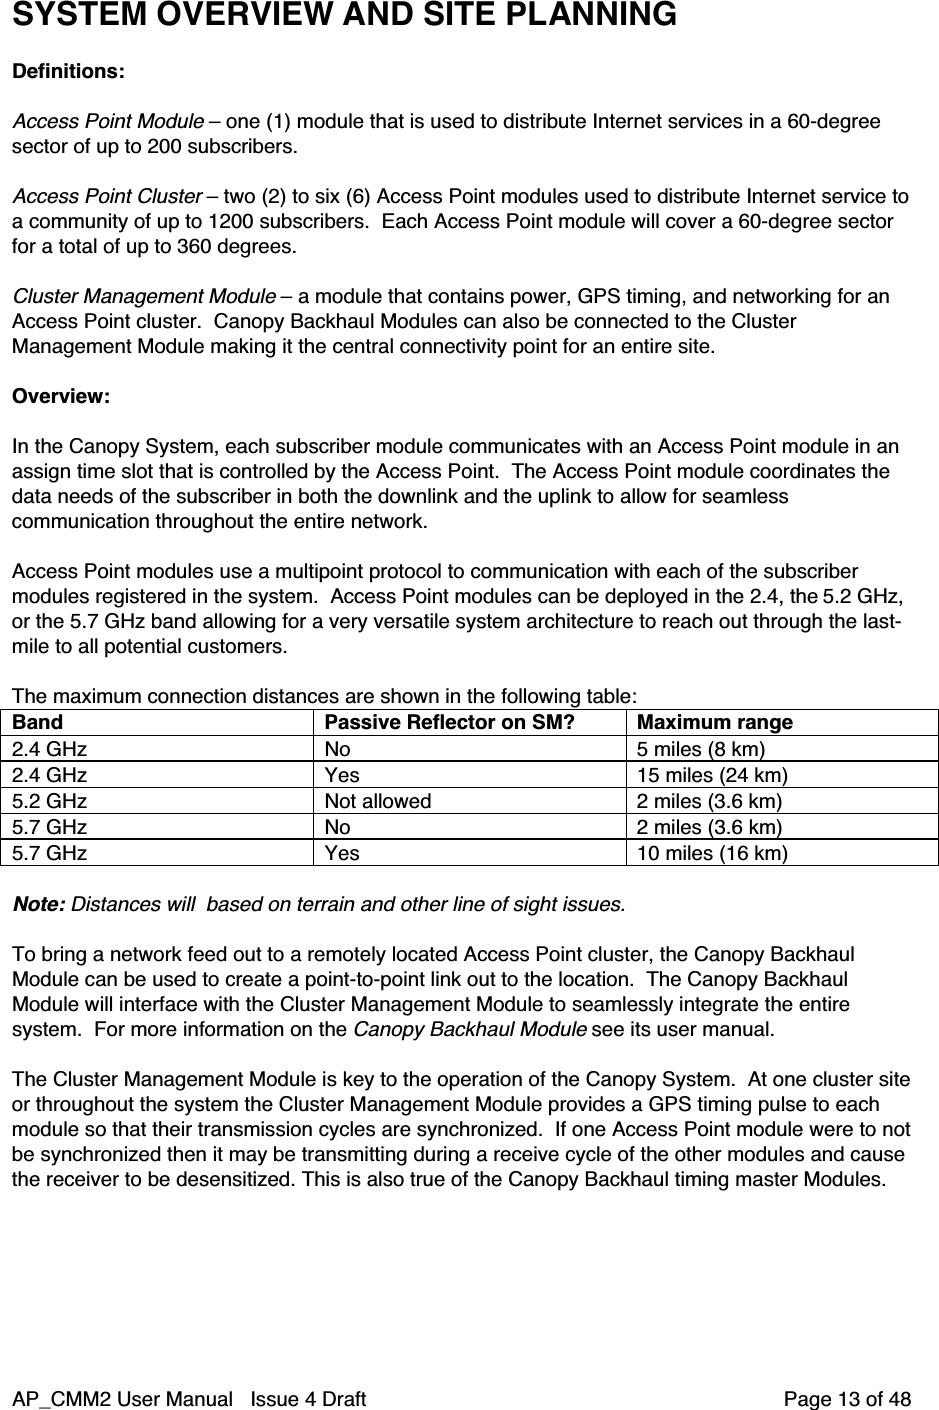 AP_CMM2 User Manual   Issue 4 Draft         Page 13 of 48SYSTEM OVERVIEW AND SITE PLANNINGDefinitions:Access Point Module – one (1) module that is used to distribute Internet services in a 60-degreesector of up to 200 subscribers.Access Point Cluster – two (2) to six (6) Access Point modules used to distribute Internet service toa community of up to 1200 subscribers.  Each Access Point module will cover a 60-degree sectorfor a total of up to 360 degrees.Cluster Management Module – a module that contains power, GPS timing, and networking for anAccess Point cluster.  Canopy Backhaul Modules can also be connected to the ClusterManagement Module making it the central connectivity point for an entire site.Overview:In the Canopy System, each subscriber module communicates with an Access Point module in anassign time slot that is controlled by the Access Point.  The Access Point module coordinates thedata needs of the subscriber in both the downlink and the uplink to allow for seamlesscommunication throughout the entire network.Access Point modules use a multipoint protocol to communication with each of the subscribermodules registered in the system.  Access Point modules can be deployed in the 2.4, the 5.2 GHz,or the 5.7 GHz band allowing for a very versatile system architecture to reach out through the last-mile to all potential customers.The maximum connection distances are shown in the following table:Band Passive Reflector on SM? Maximum range2.4 GHz No 5 miles (8 km)2.4 GHz Yes 15 miles (24 km)5.2 GHz Not allowed 2 miles (3.6 km)5.7 GHz No 2 miles (3.6 km)5.7 GHz Yes 10 miles (16 km)Note: Distances will  based on terrain and other line of sight issues.To bring a network feed out to a remotely located Access Point cluster, the Canopy BackhaulModule can be used to create a point-to-point link out to the location.  The Canopy BackhaulModule will interface with the Cluster Management Module to seamlessly integrate the entiresystem.  For more information on the Canopy Backhaul Module see its user manual.The Cluster Management Module is key to the operation of the Canopy System.  At one cluster siteor throughout the system the Cluster Management Module provides a GPS timing pulse to eachmodule so that their transmission cycles are synchronized.  If one Access Point module were to notbe synchronized then it may be transmitting during a receive cycle of the other modules and causethe receiver to be desensitized. This is also true of the Canopy Backhaul timing master Modules.